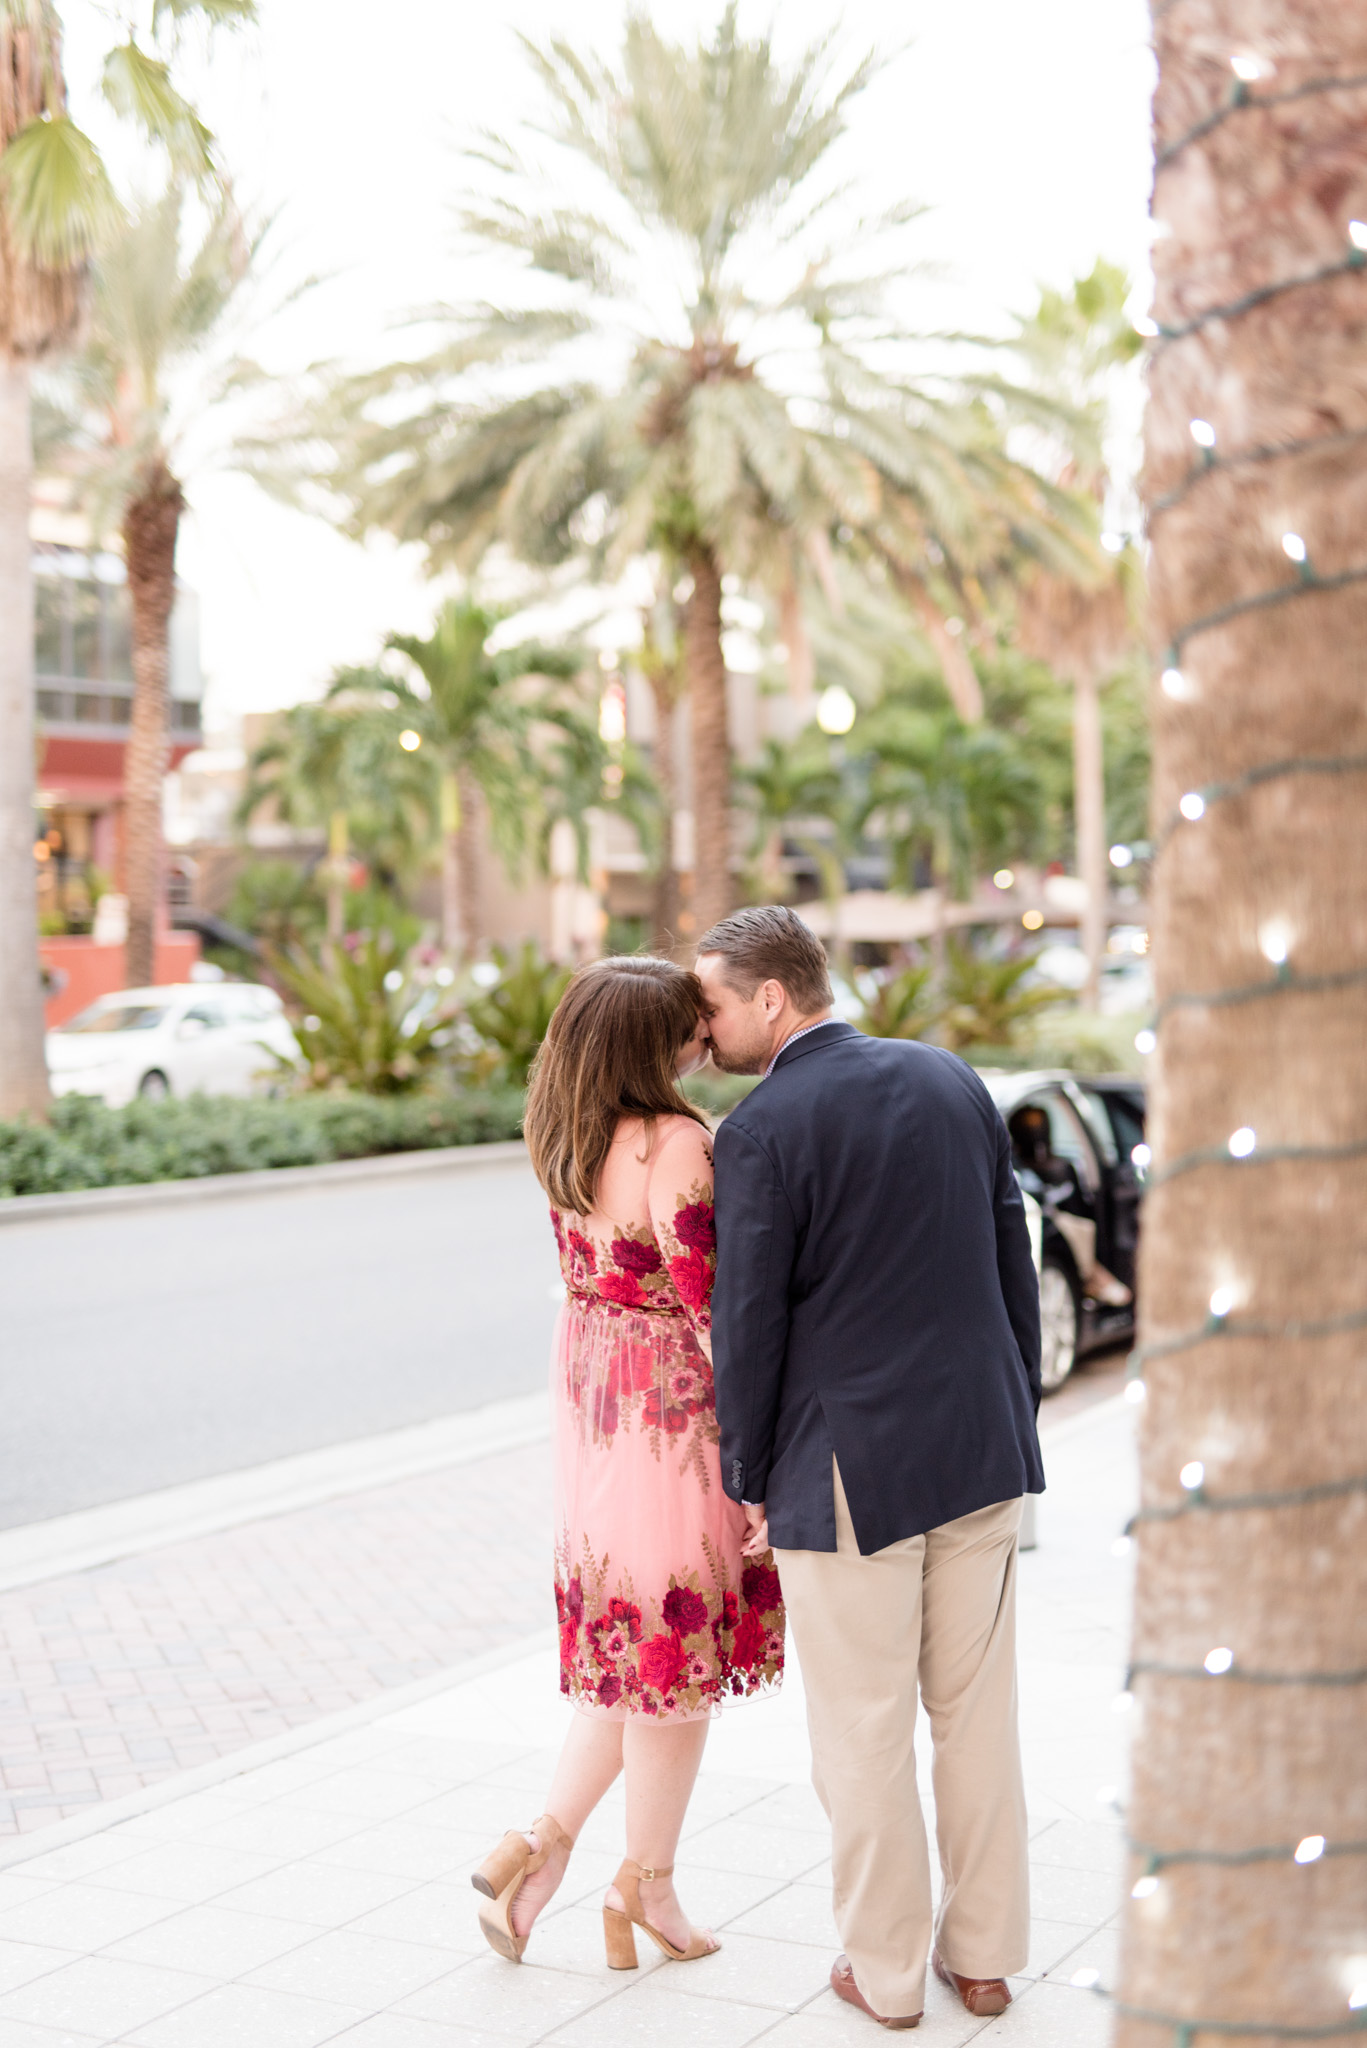 Engaged couple kisses in urban setting.